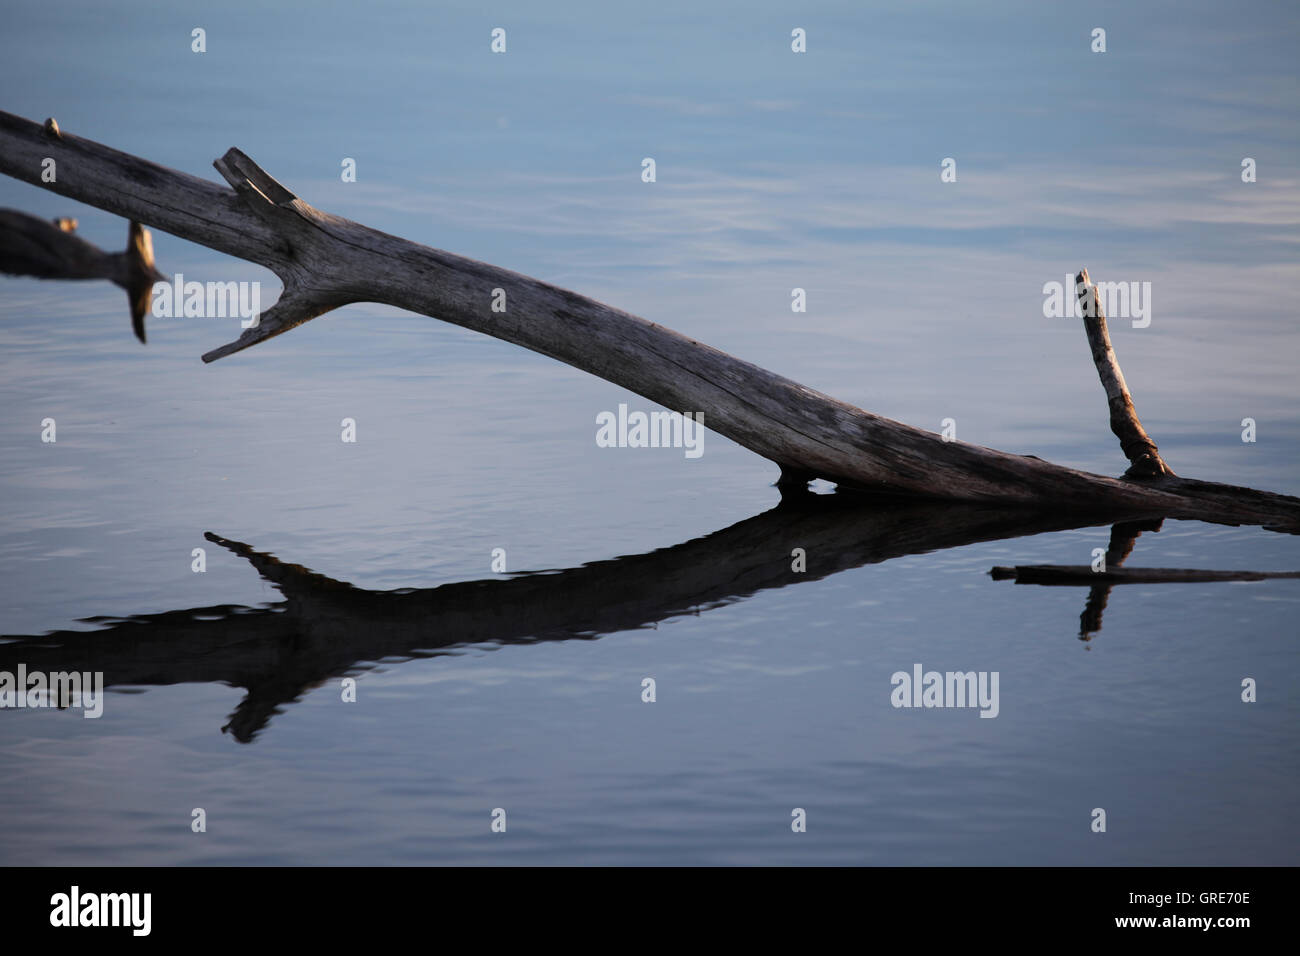 Branch In Shallow Water Stock Photo